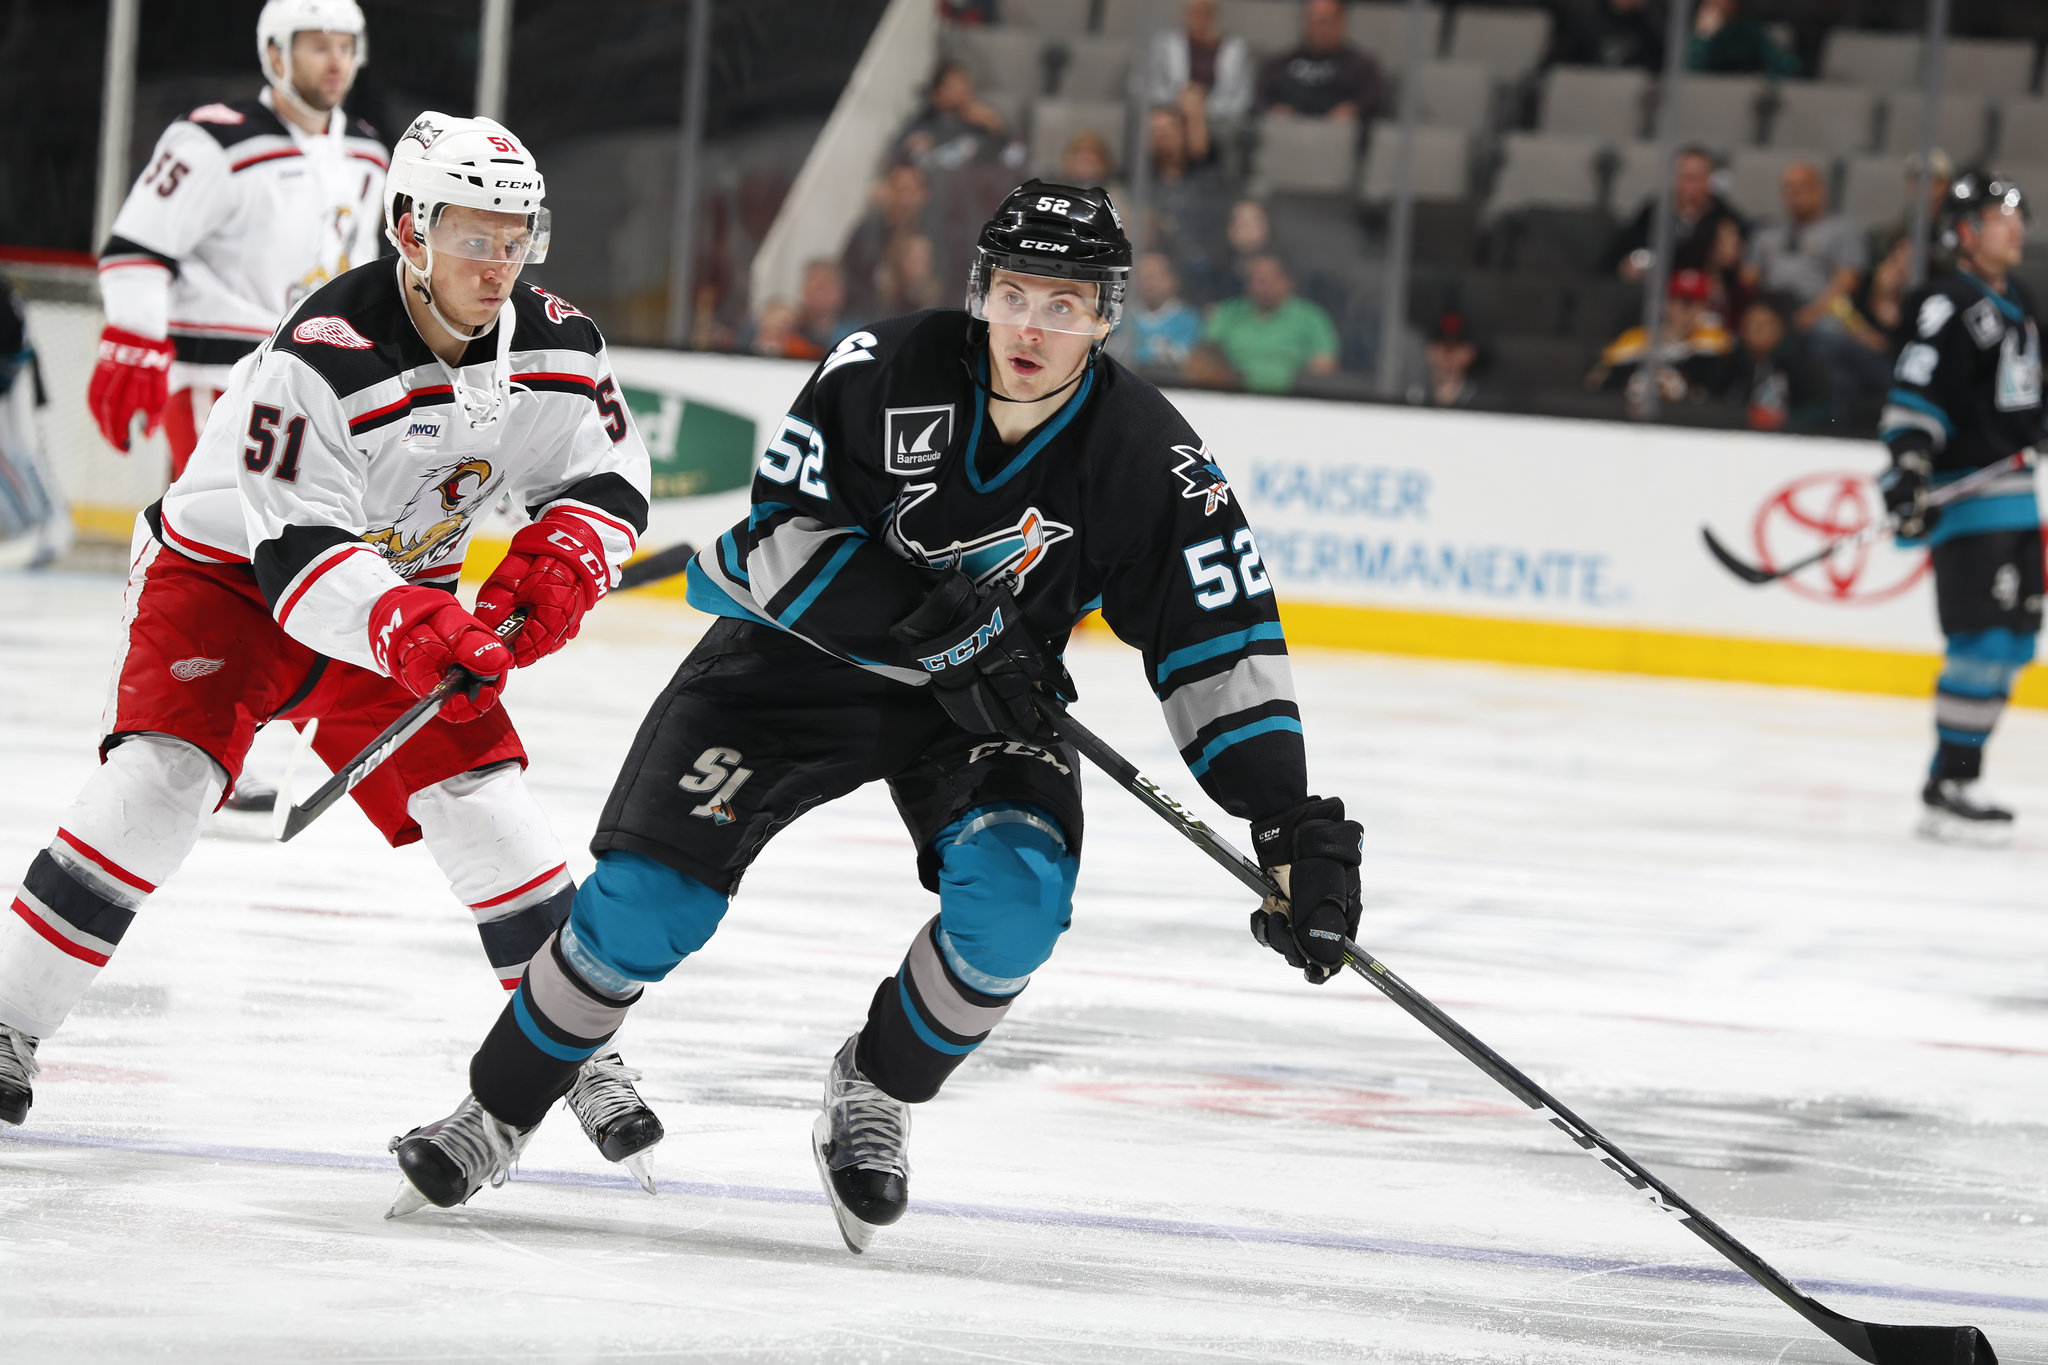 Bertuzzi-Nosek-Frk a hit with Griffins; what about the Red Wings?